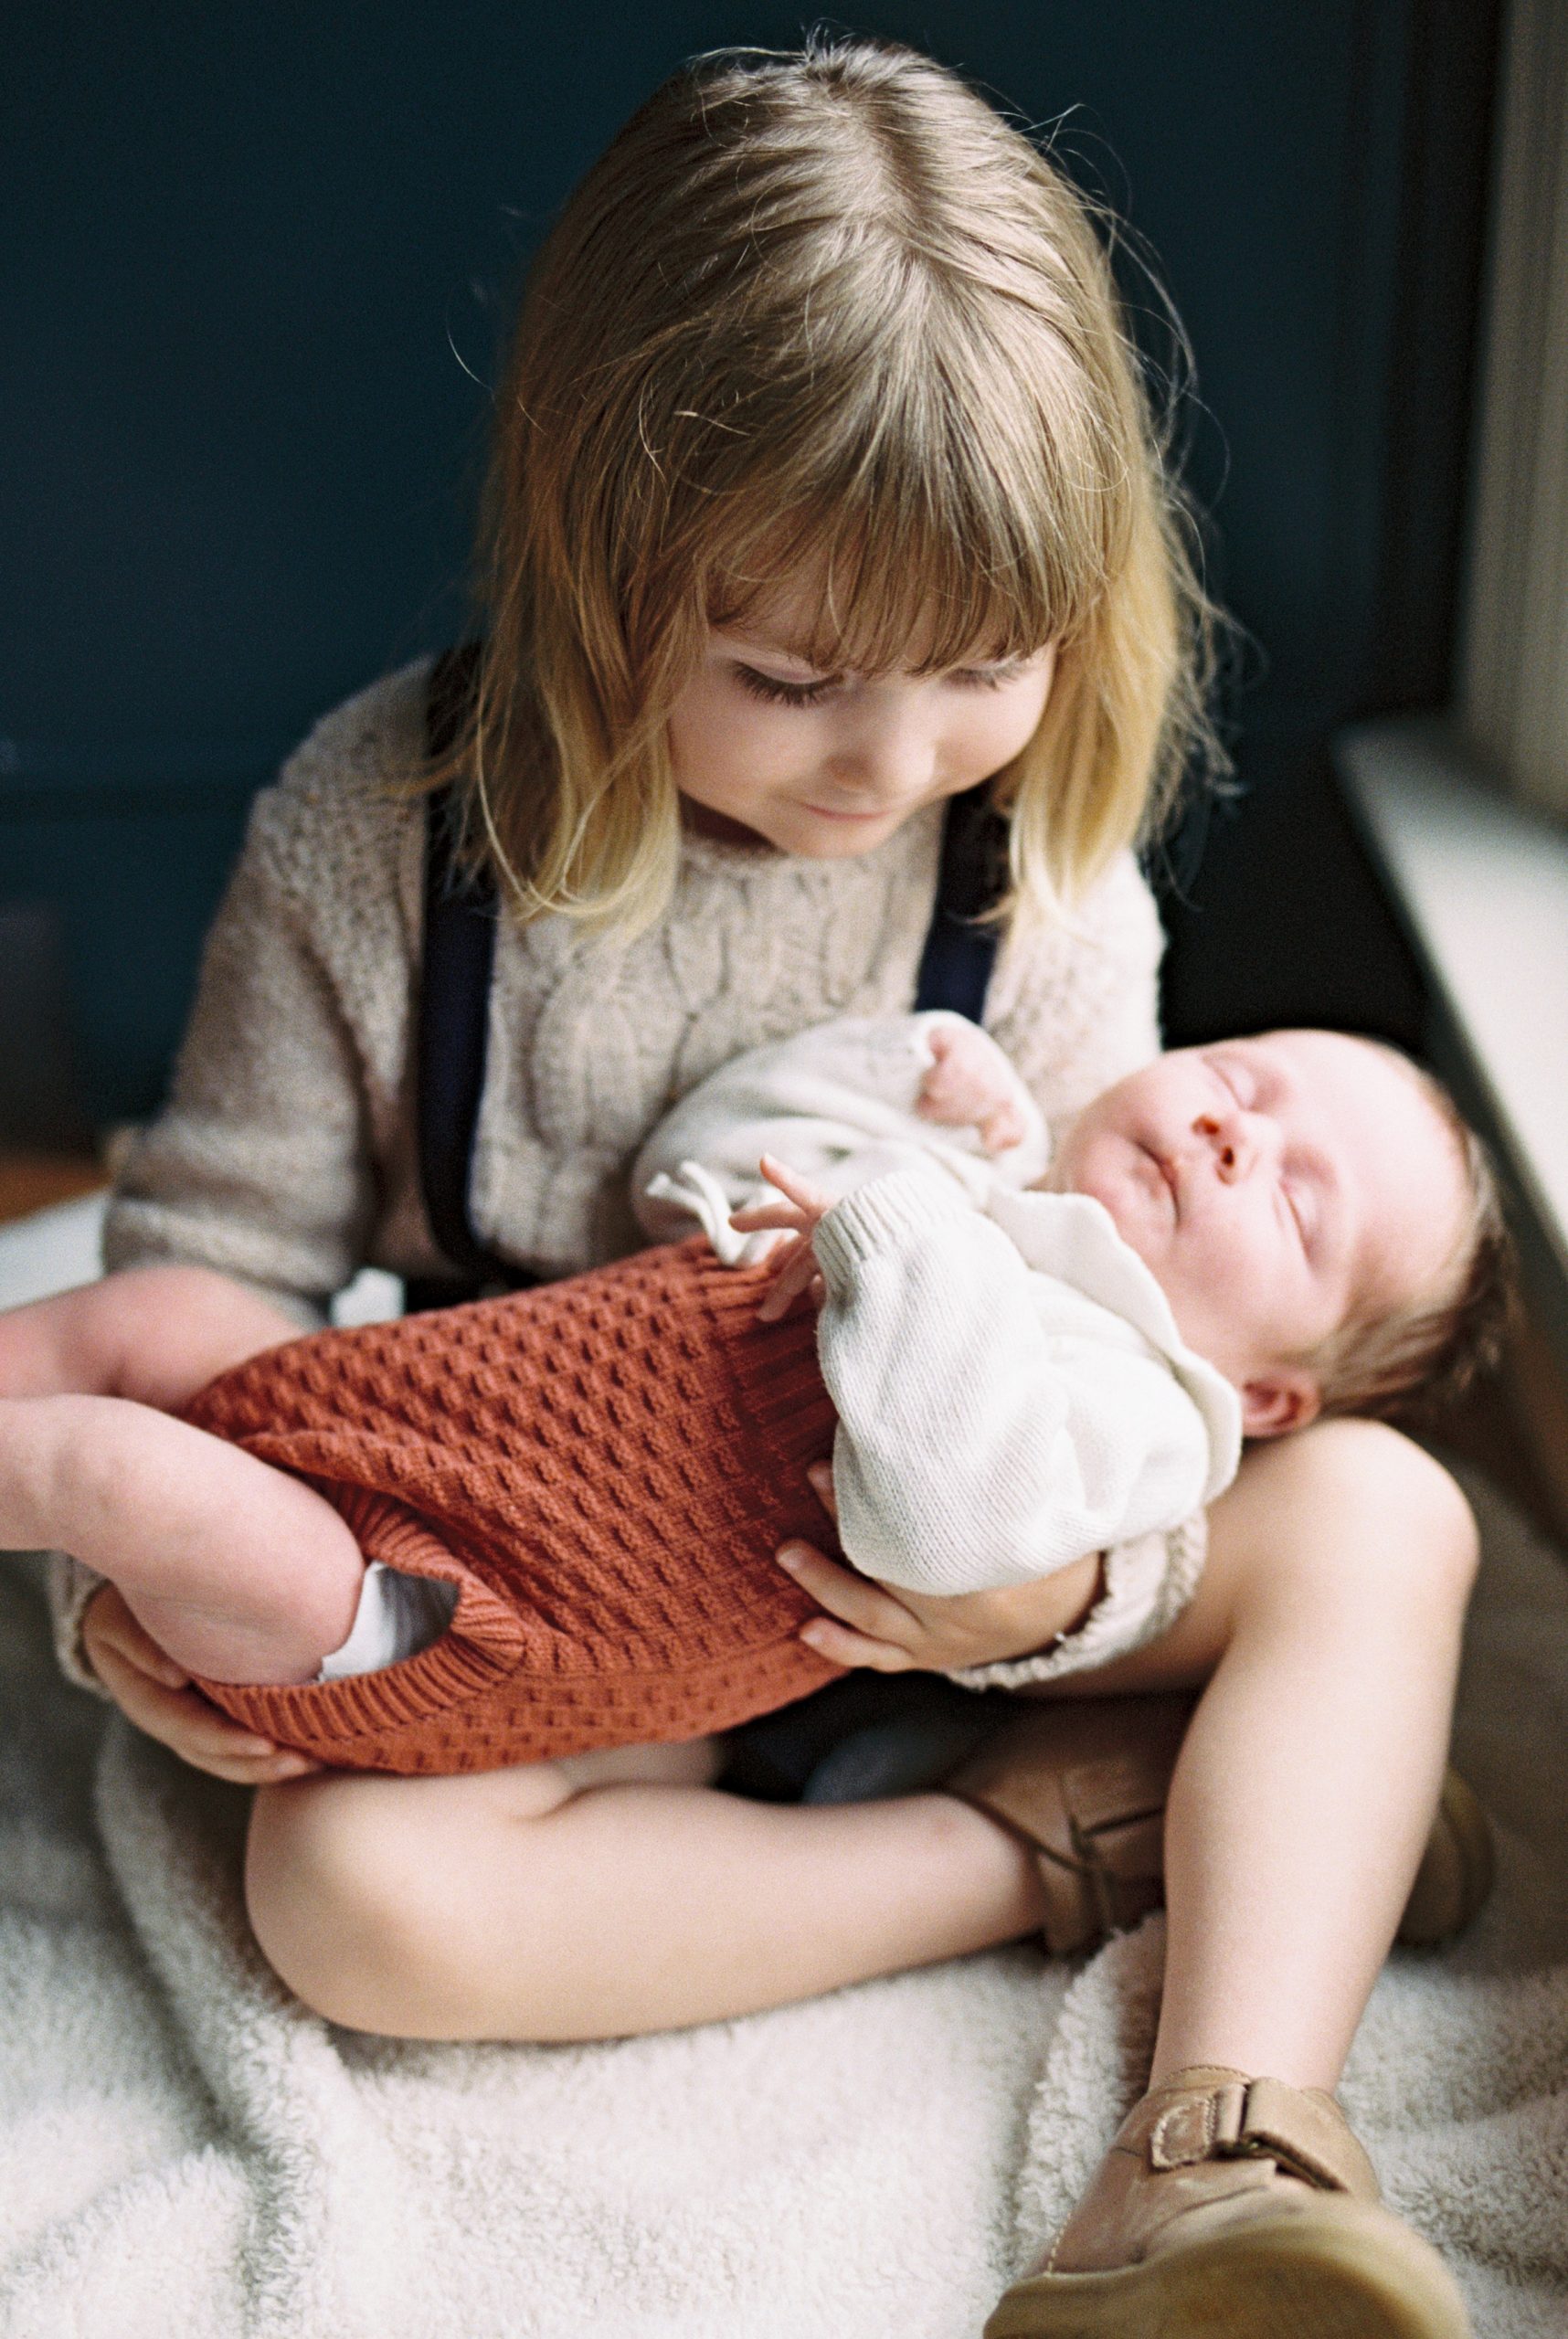 big brother holds new baby girl during Nashville lifestyle newborn portrait session